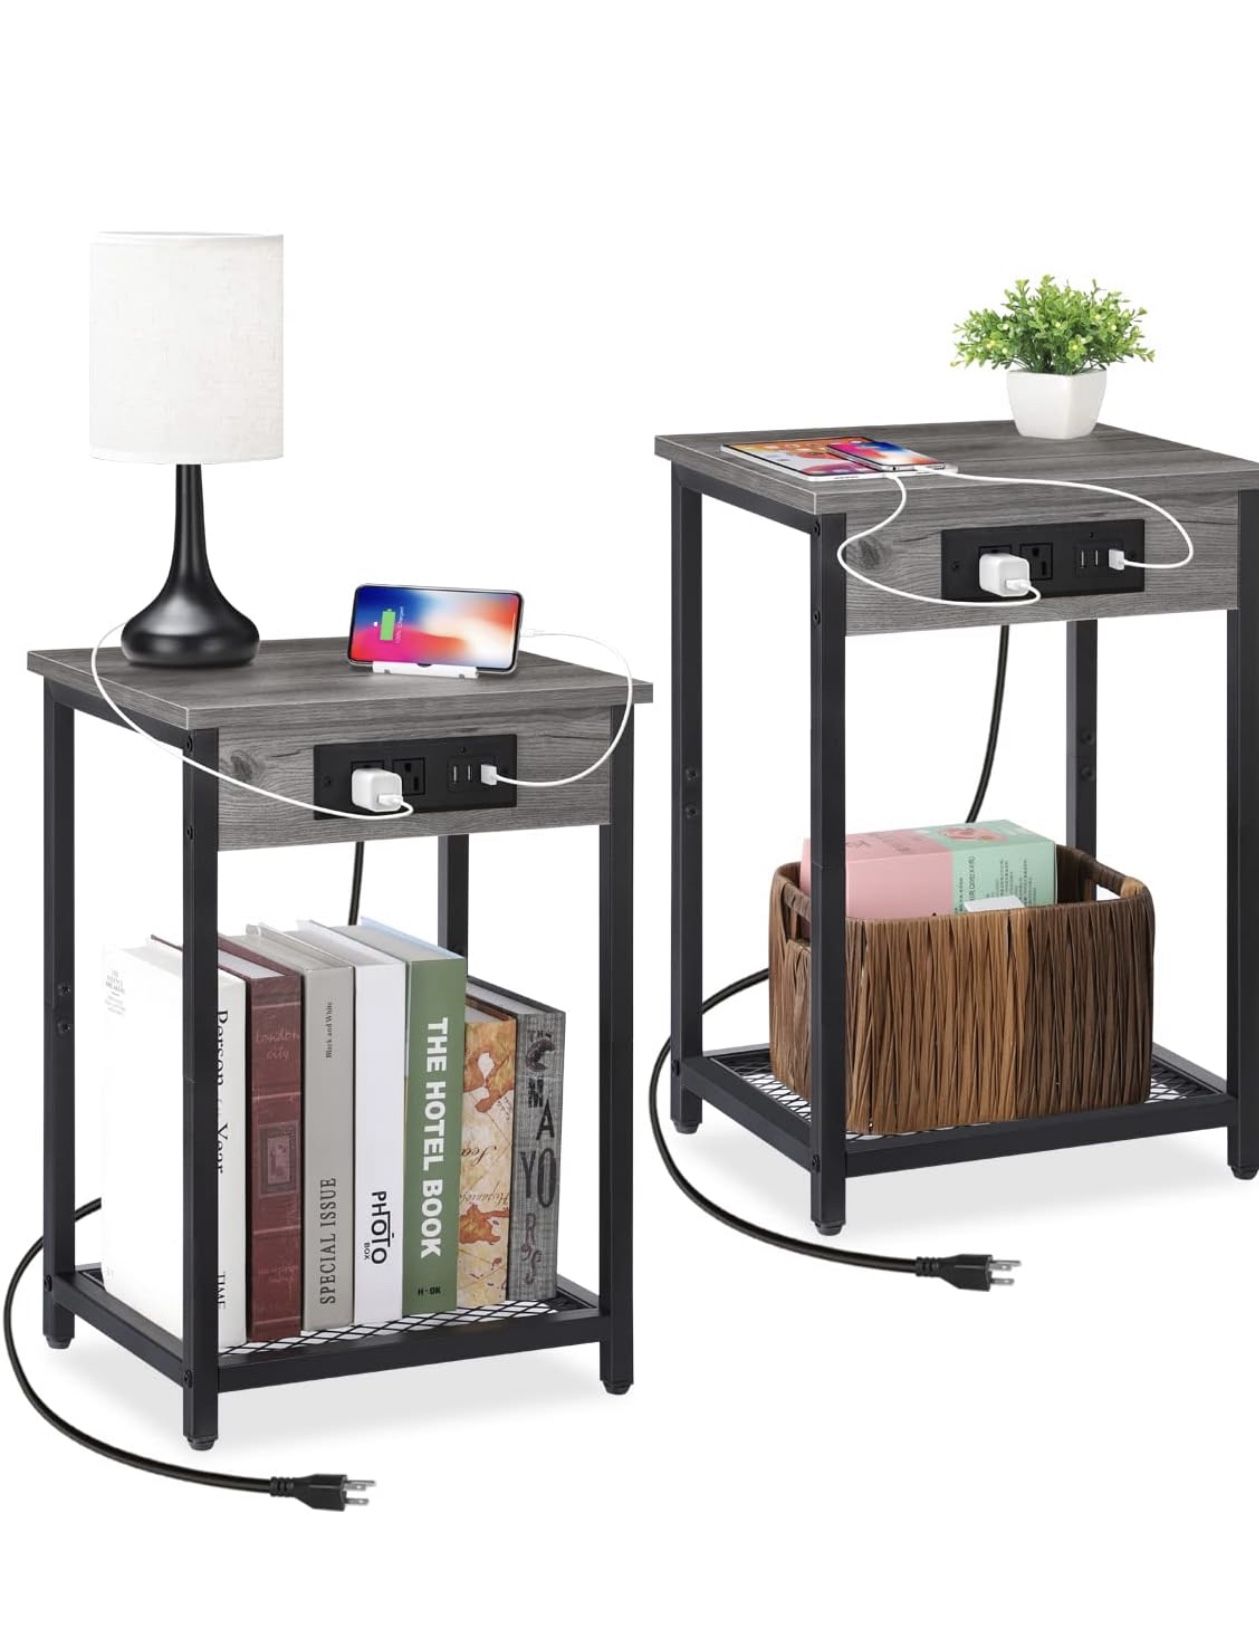 2 Set Of Nightstands With Usb Charging Cable With 2 Tier end Table 